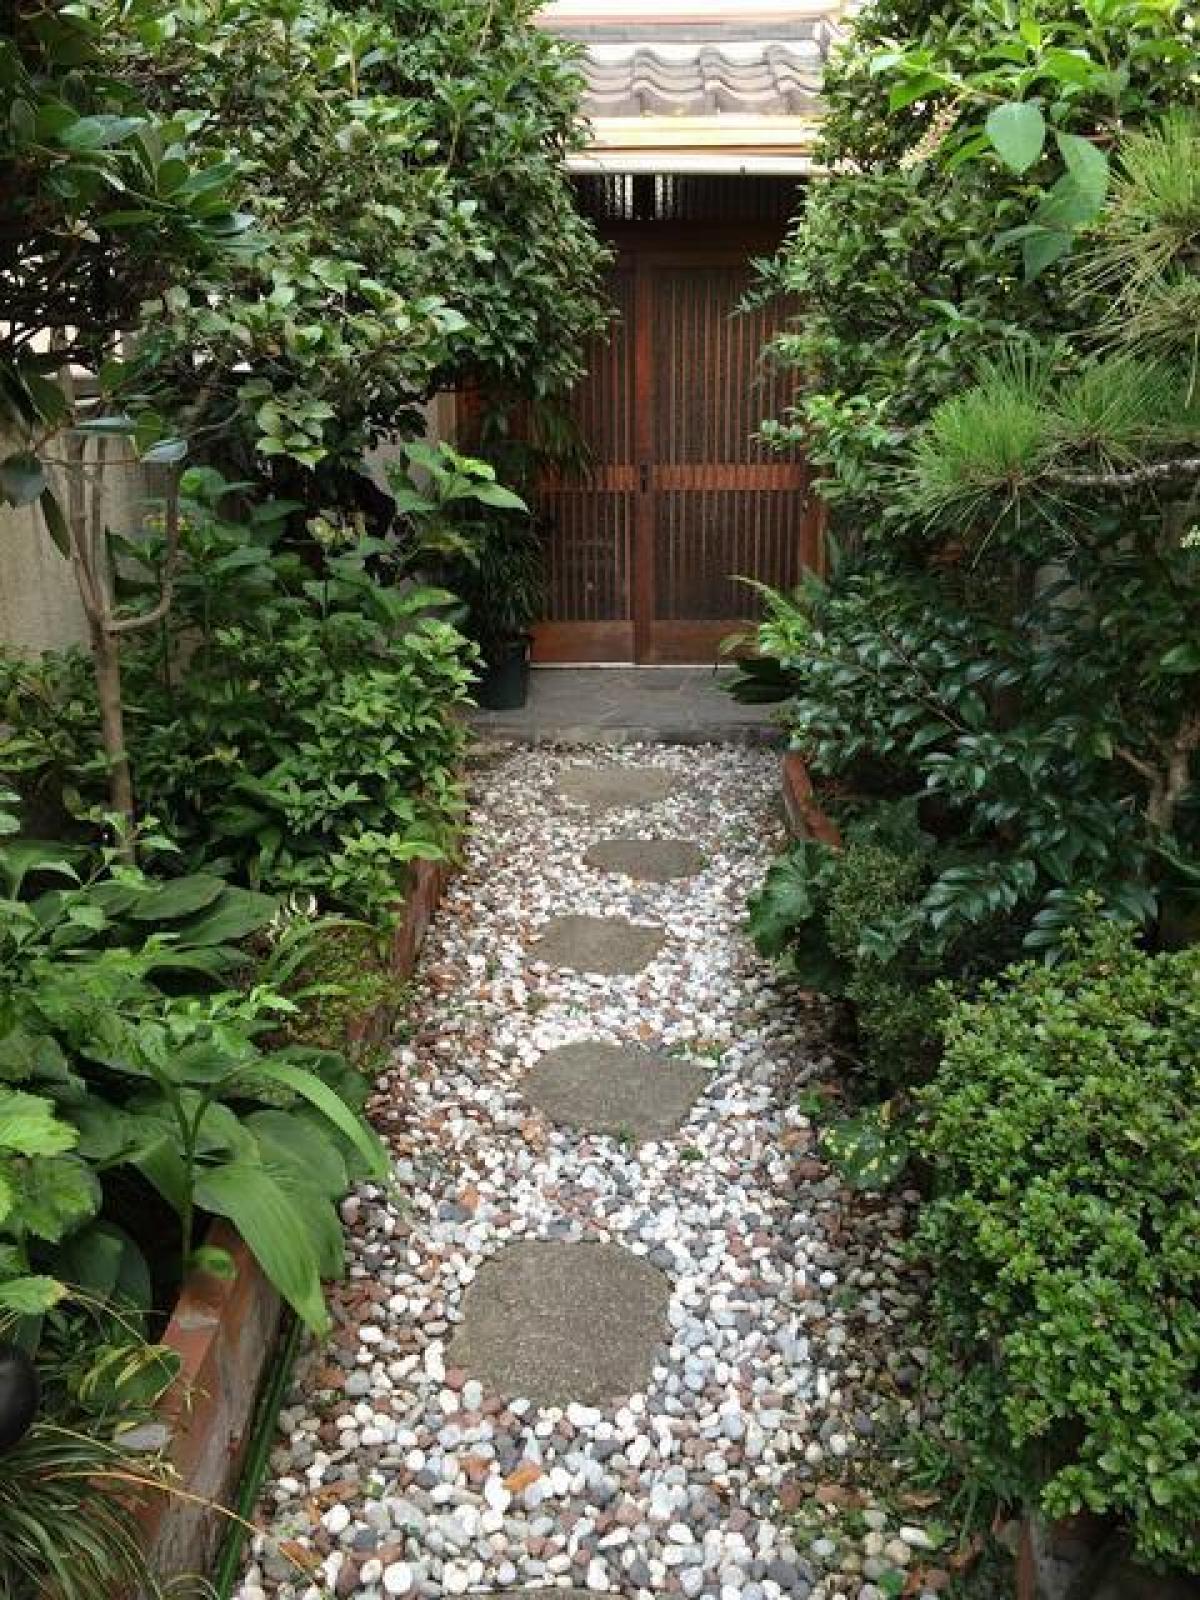 Picture of Home For Sale in Itami Shi, Hyogo, Japan